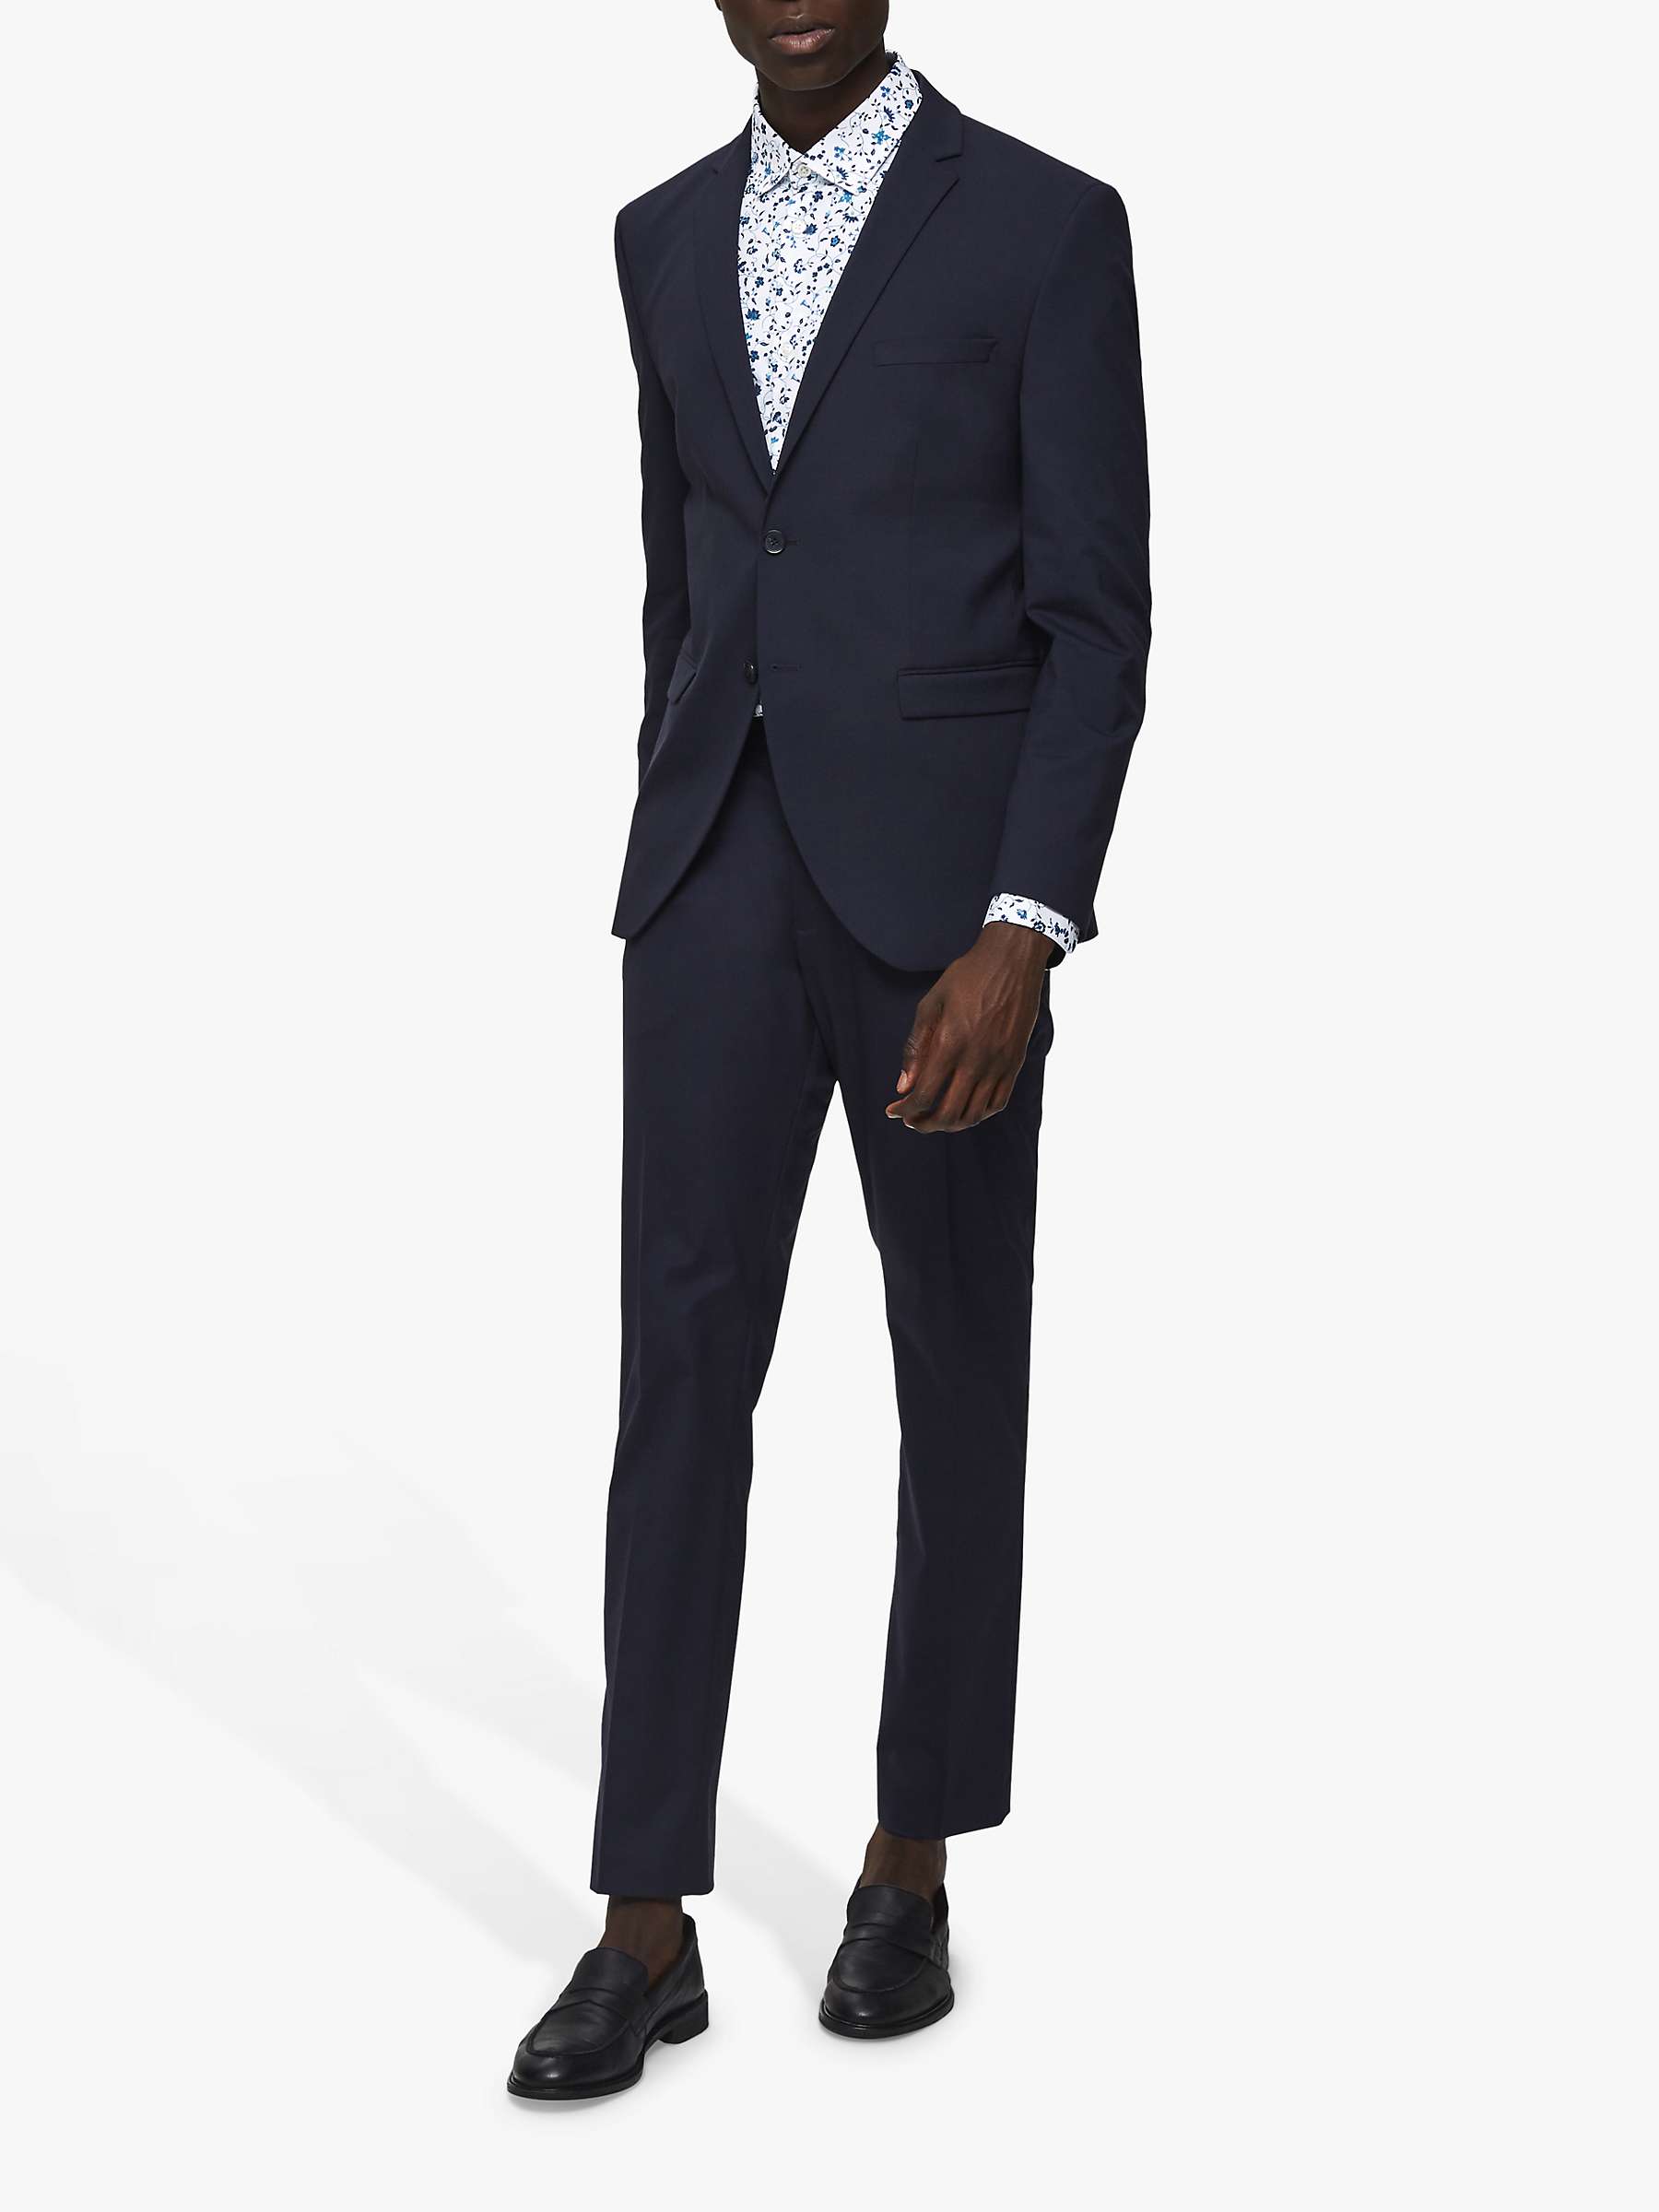 SELECTED HOMME Slim Fit Suit Trousers, Navy at John Lewis & Partners